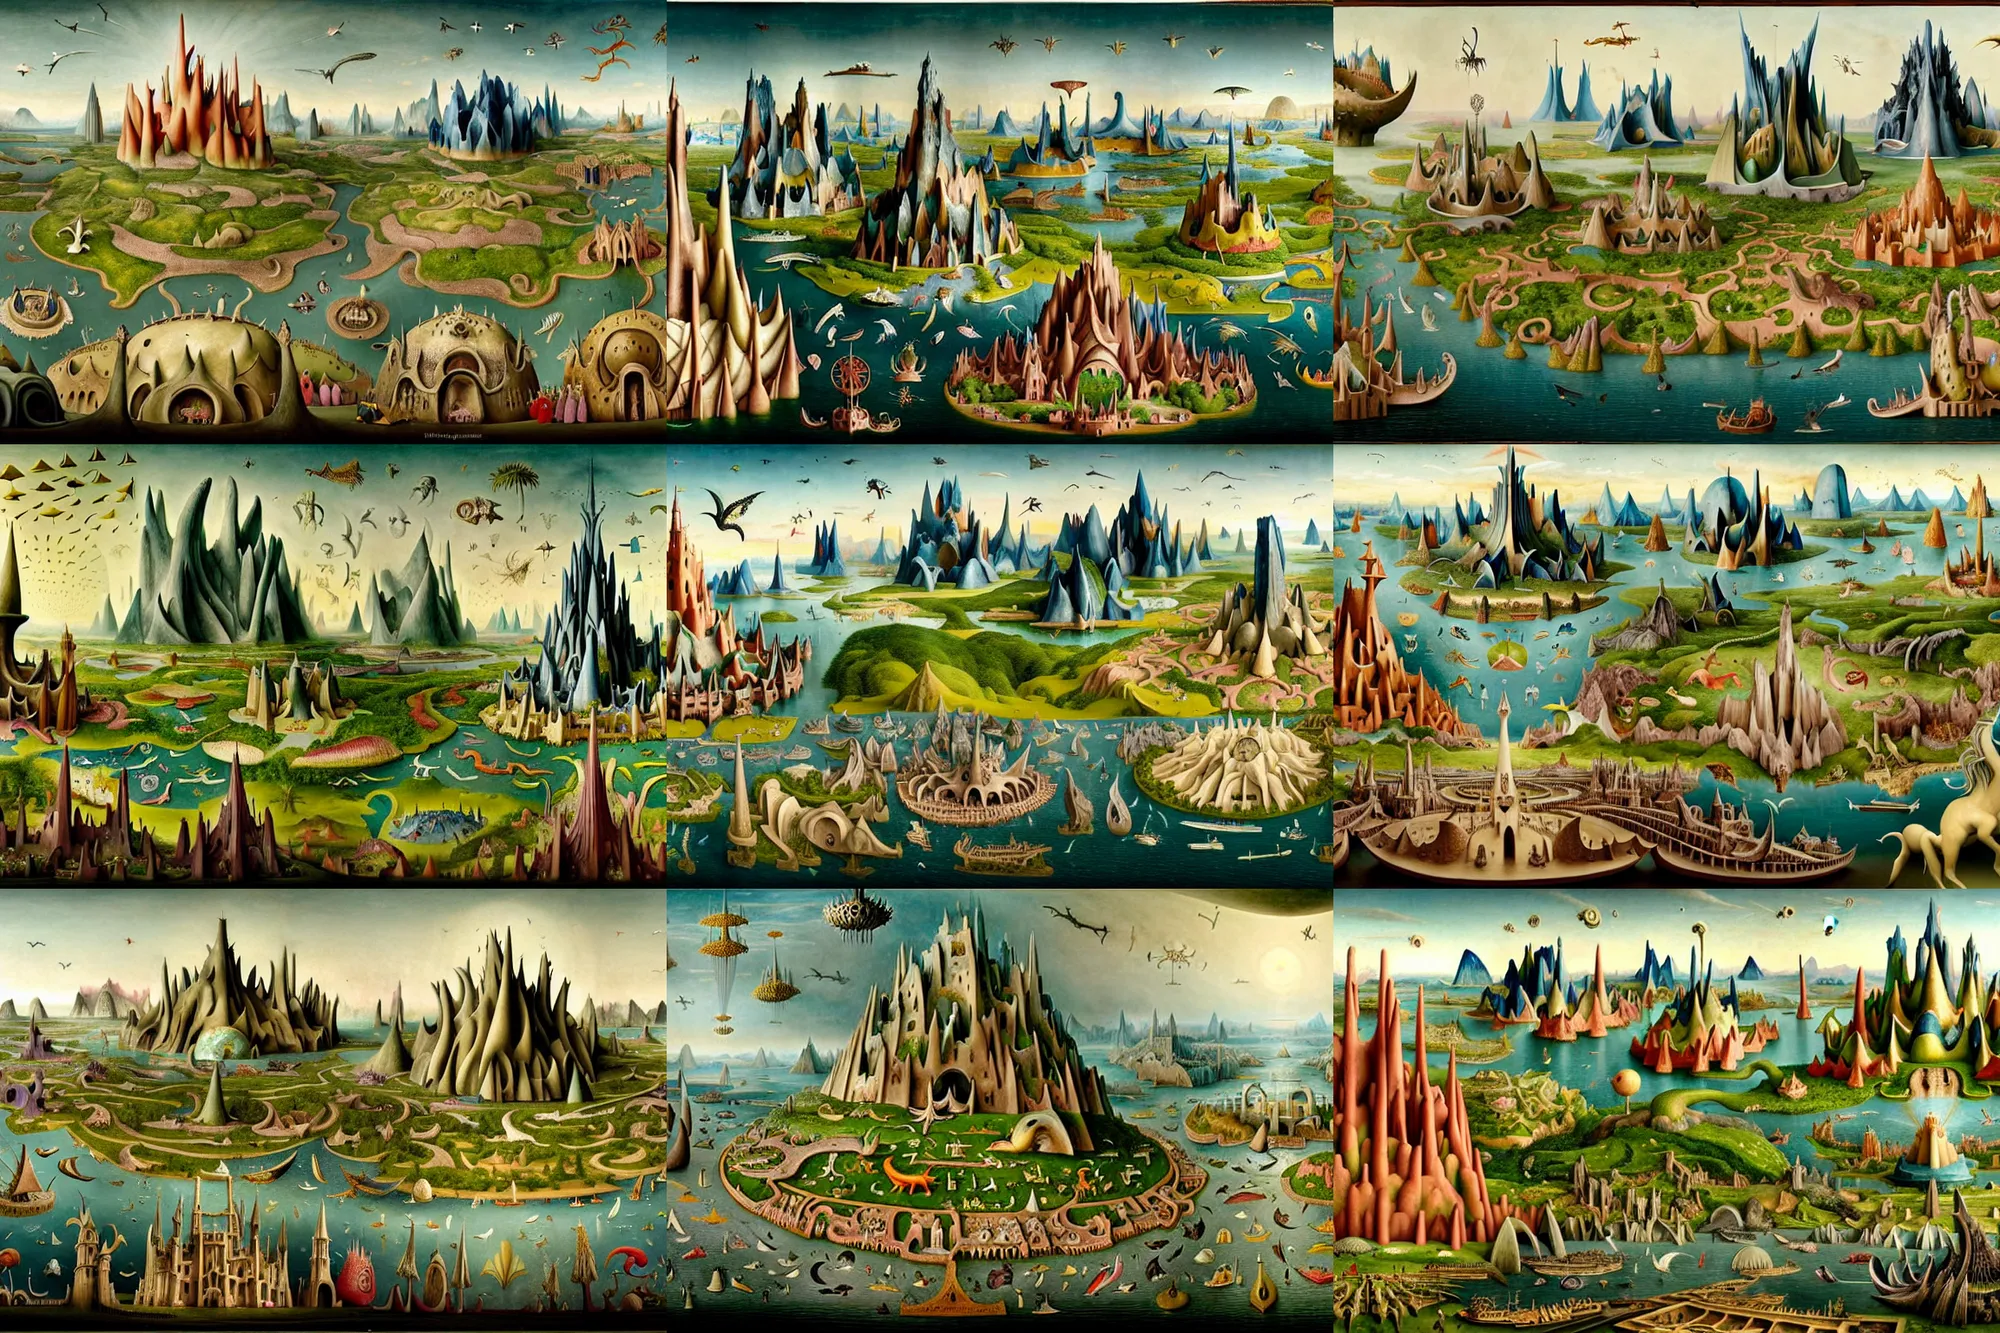 Prompt: a beautiful and insanely detailed matte painting of a magical mythical medieval sprawling civilization with surreal architecture designed by Heironymous Bosch, mega structures inspired by Heironymous Bosch's Garden of Earthly Delights, creatures of the air and sea inspired by Heironymous Bosch's Garden of Earthly Delights, ships in the harbor inspired by Heironymous Bosch's Garden of Earthly Delights, vast surreal landscape and horizon by Jim Burns and Tyler Edlin, rich pastel color palette, masterpiece!!, grand!, imaginative!!!, whimsical!!, epic scale, intricate details, sense of awe, elite, fantasy realism, complex layered composition!!